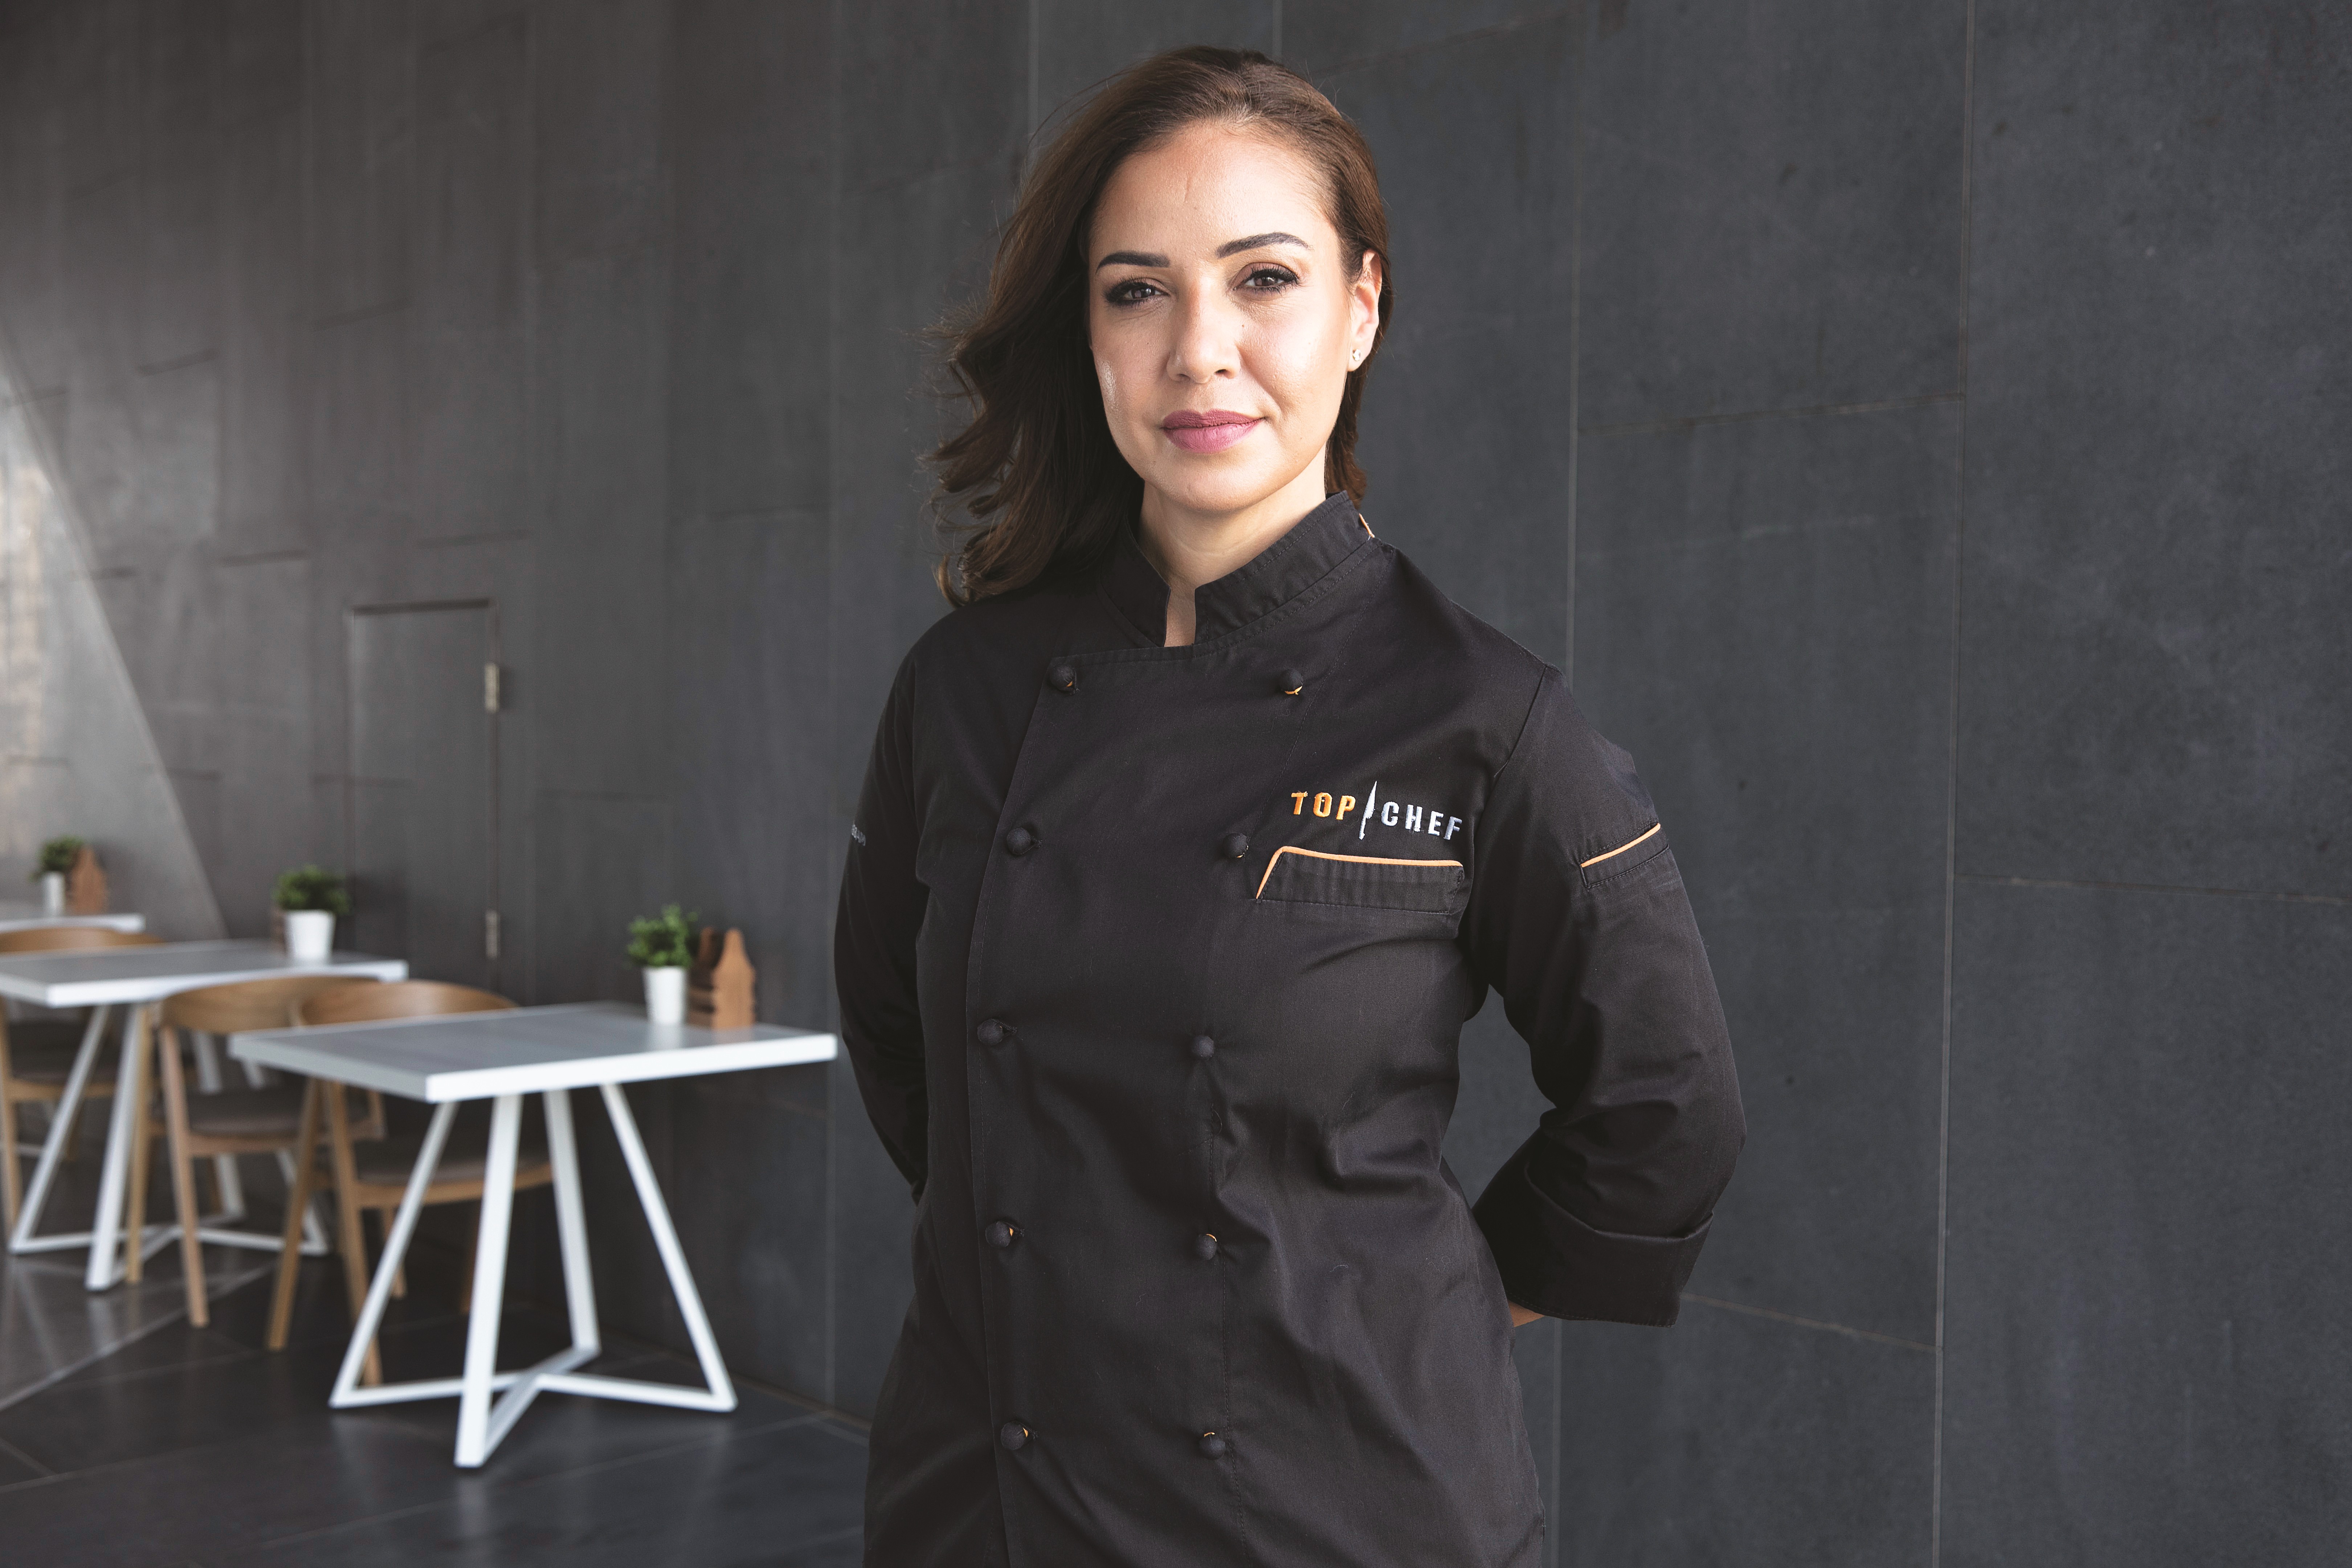 Chef Hala Ayash: From passion to profession